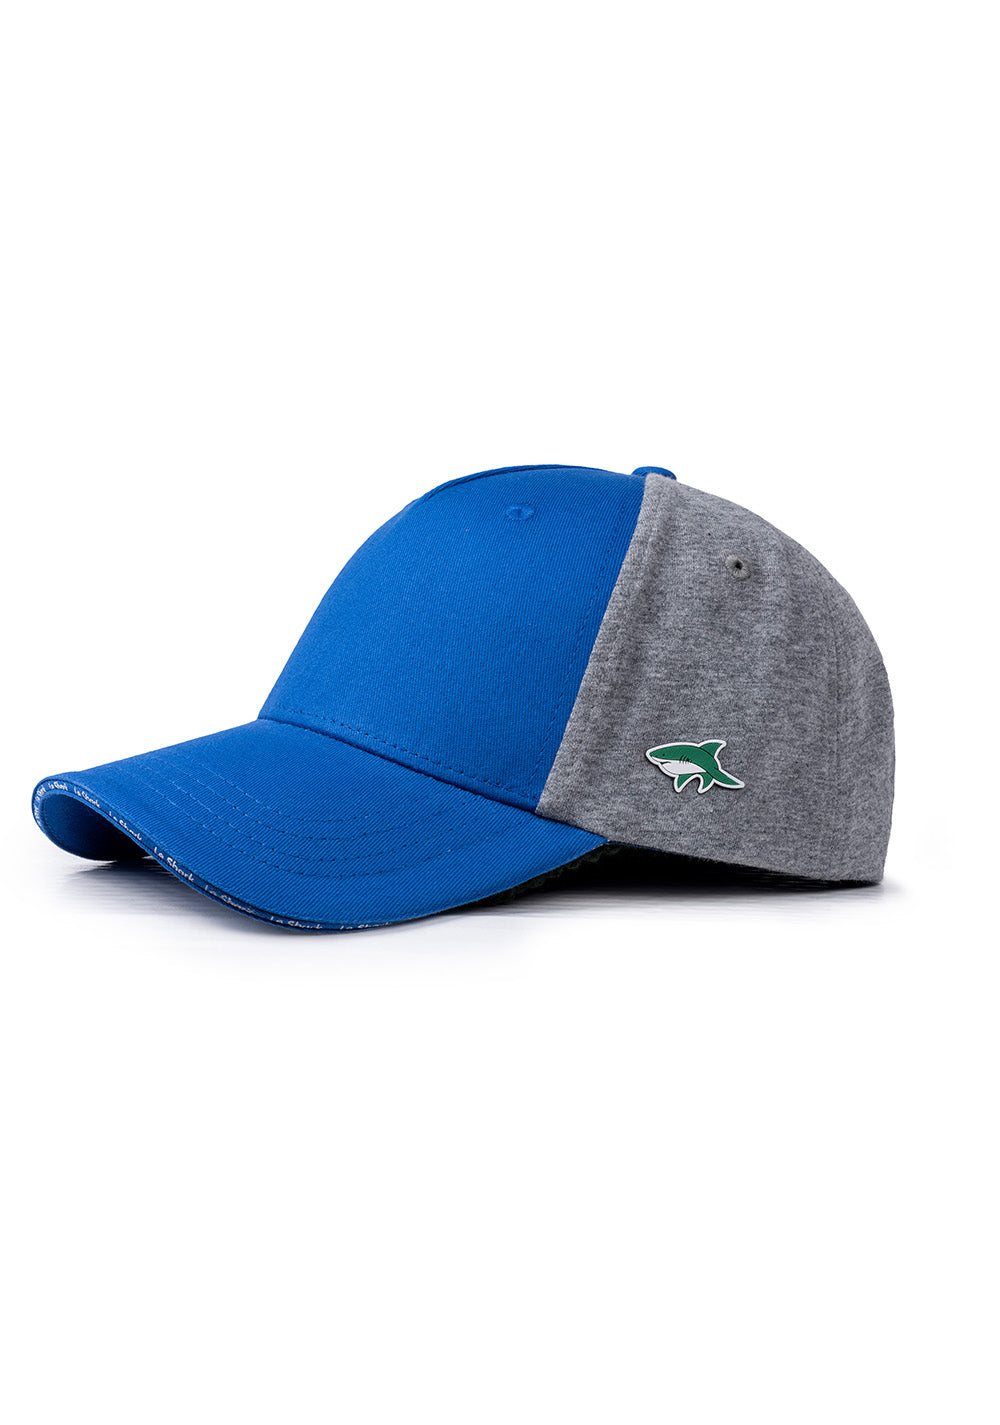 ZOVATO LE SHARK POLYESTER JERSEY CAP Limoges Blue